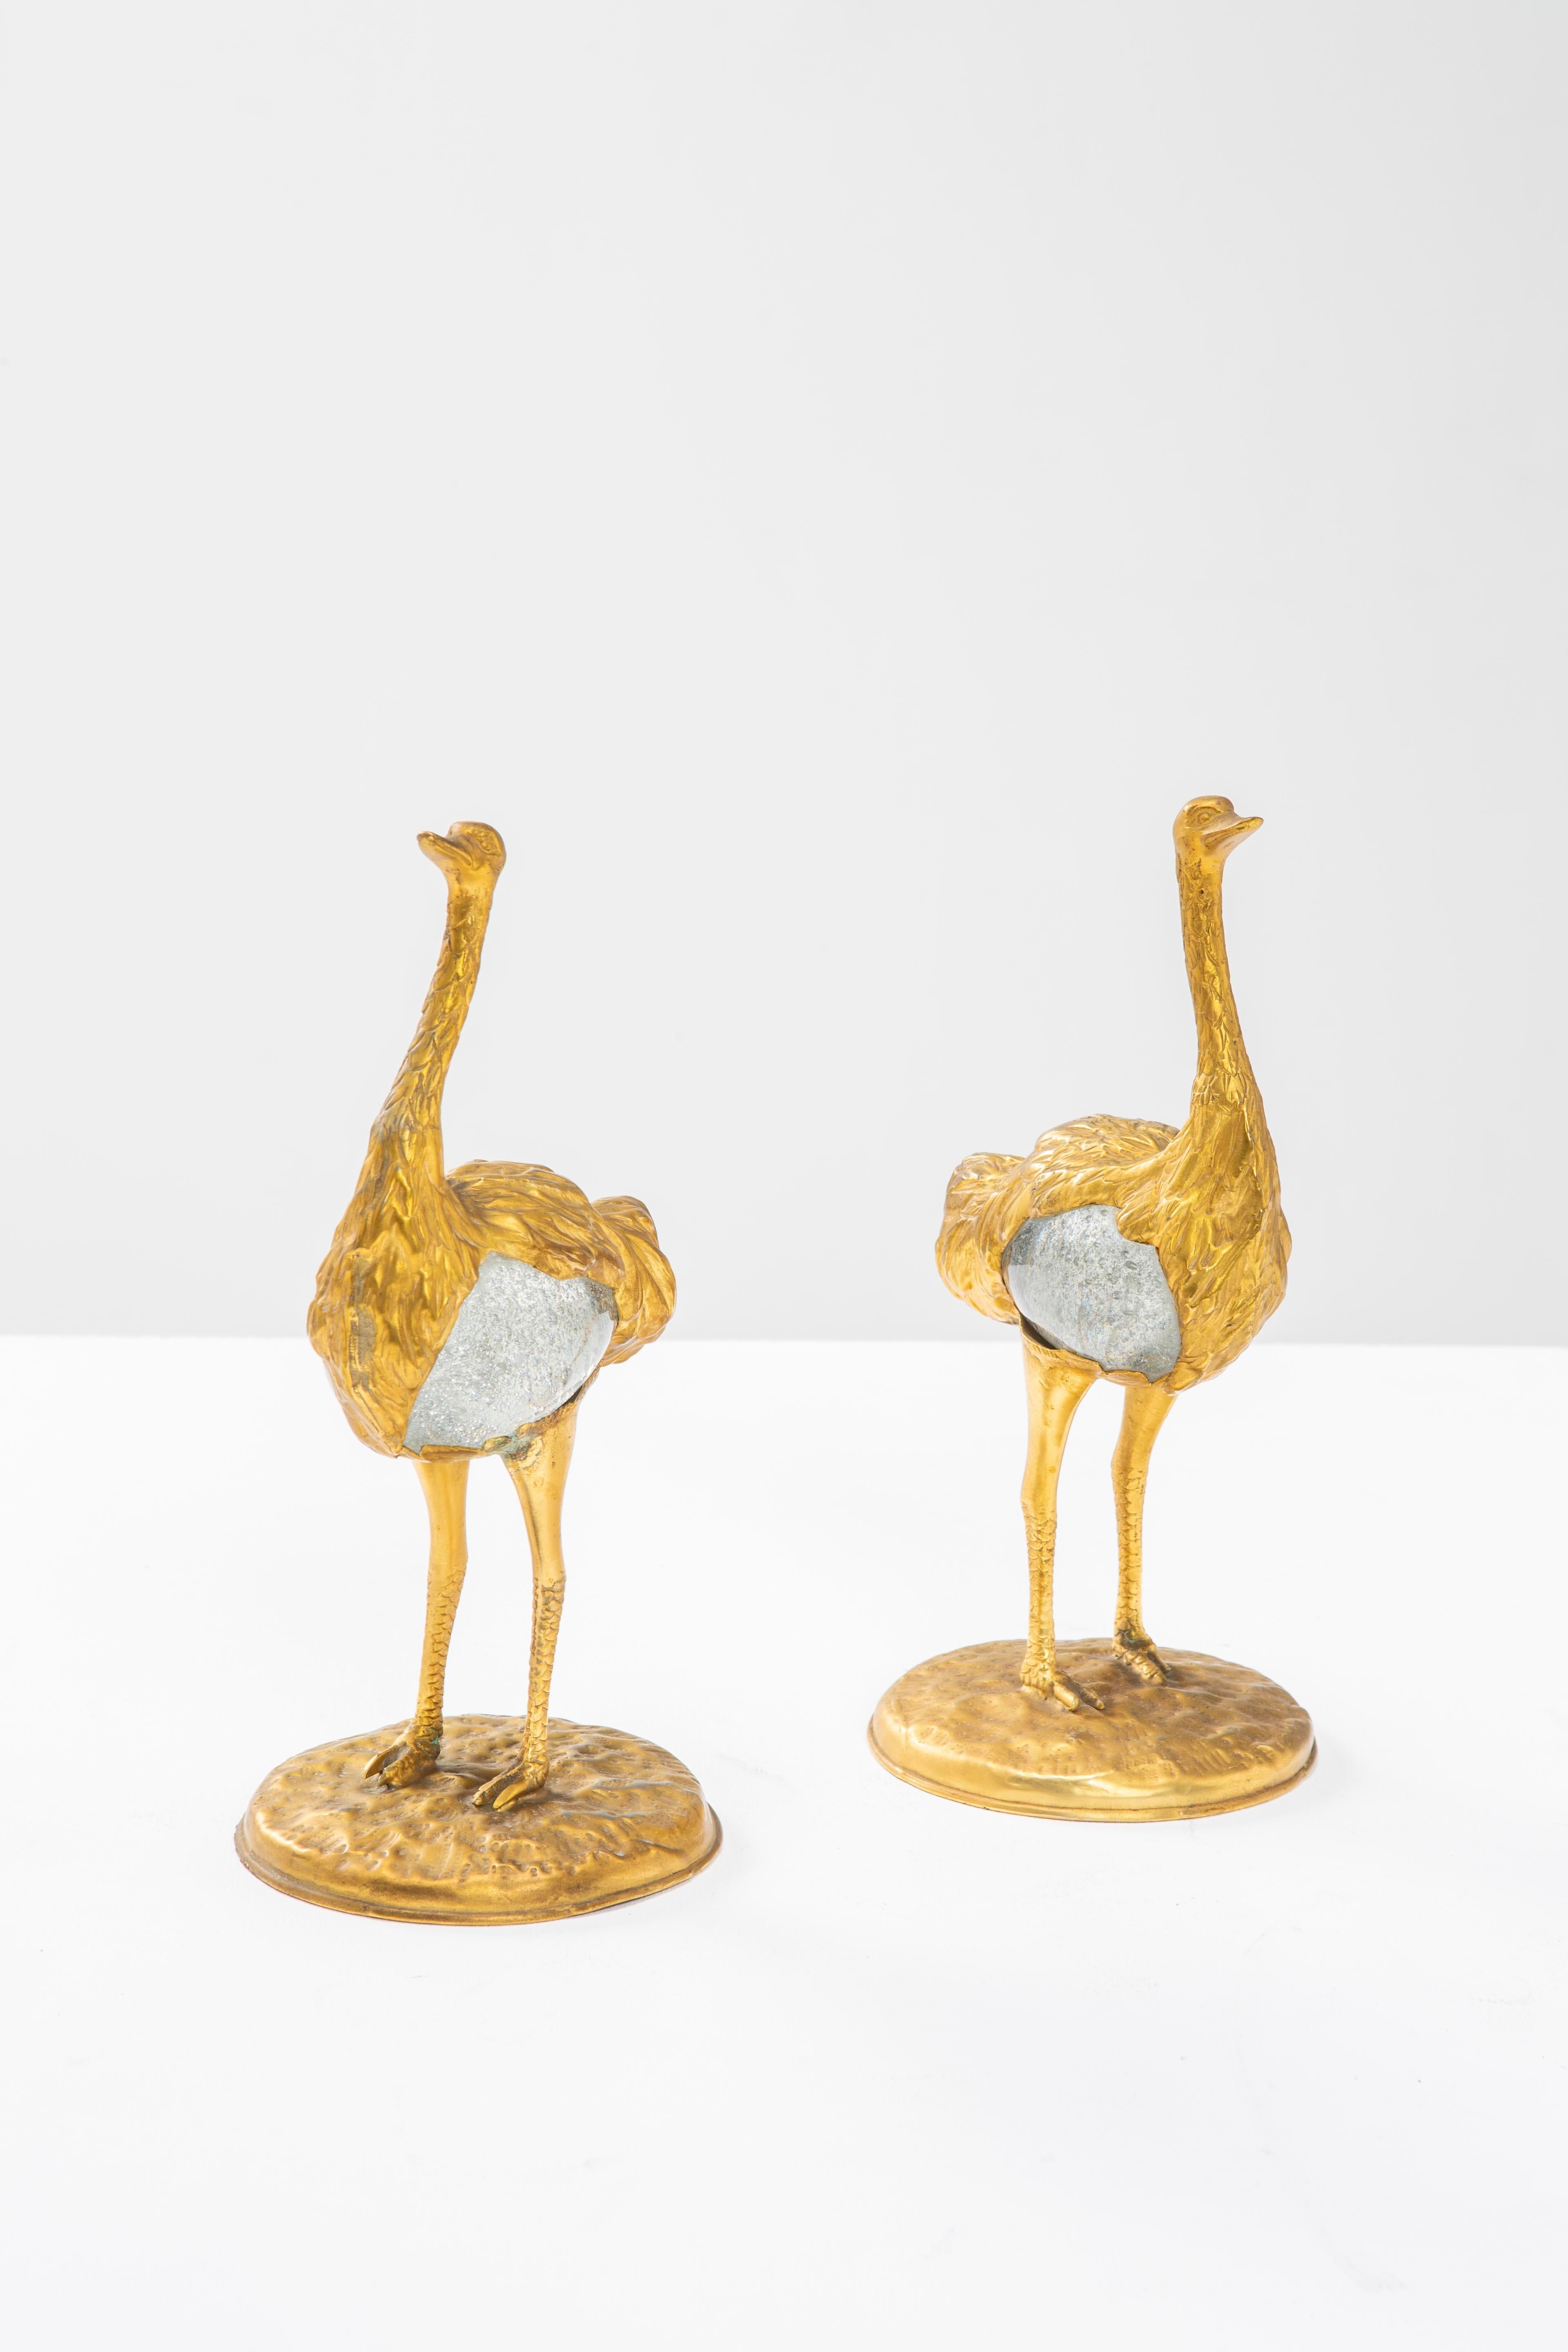 These two ostriches, designed and made by Gabriella Crespi, are elegant lost-wax bronze sculptures with globular Murano glass bodies created by Barovier&Toso. These sculptures are part of the Animali series created by Gabriella Crespi and composed